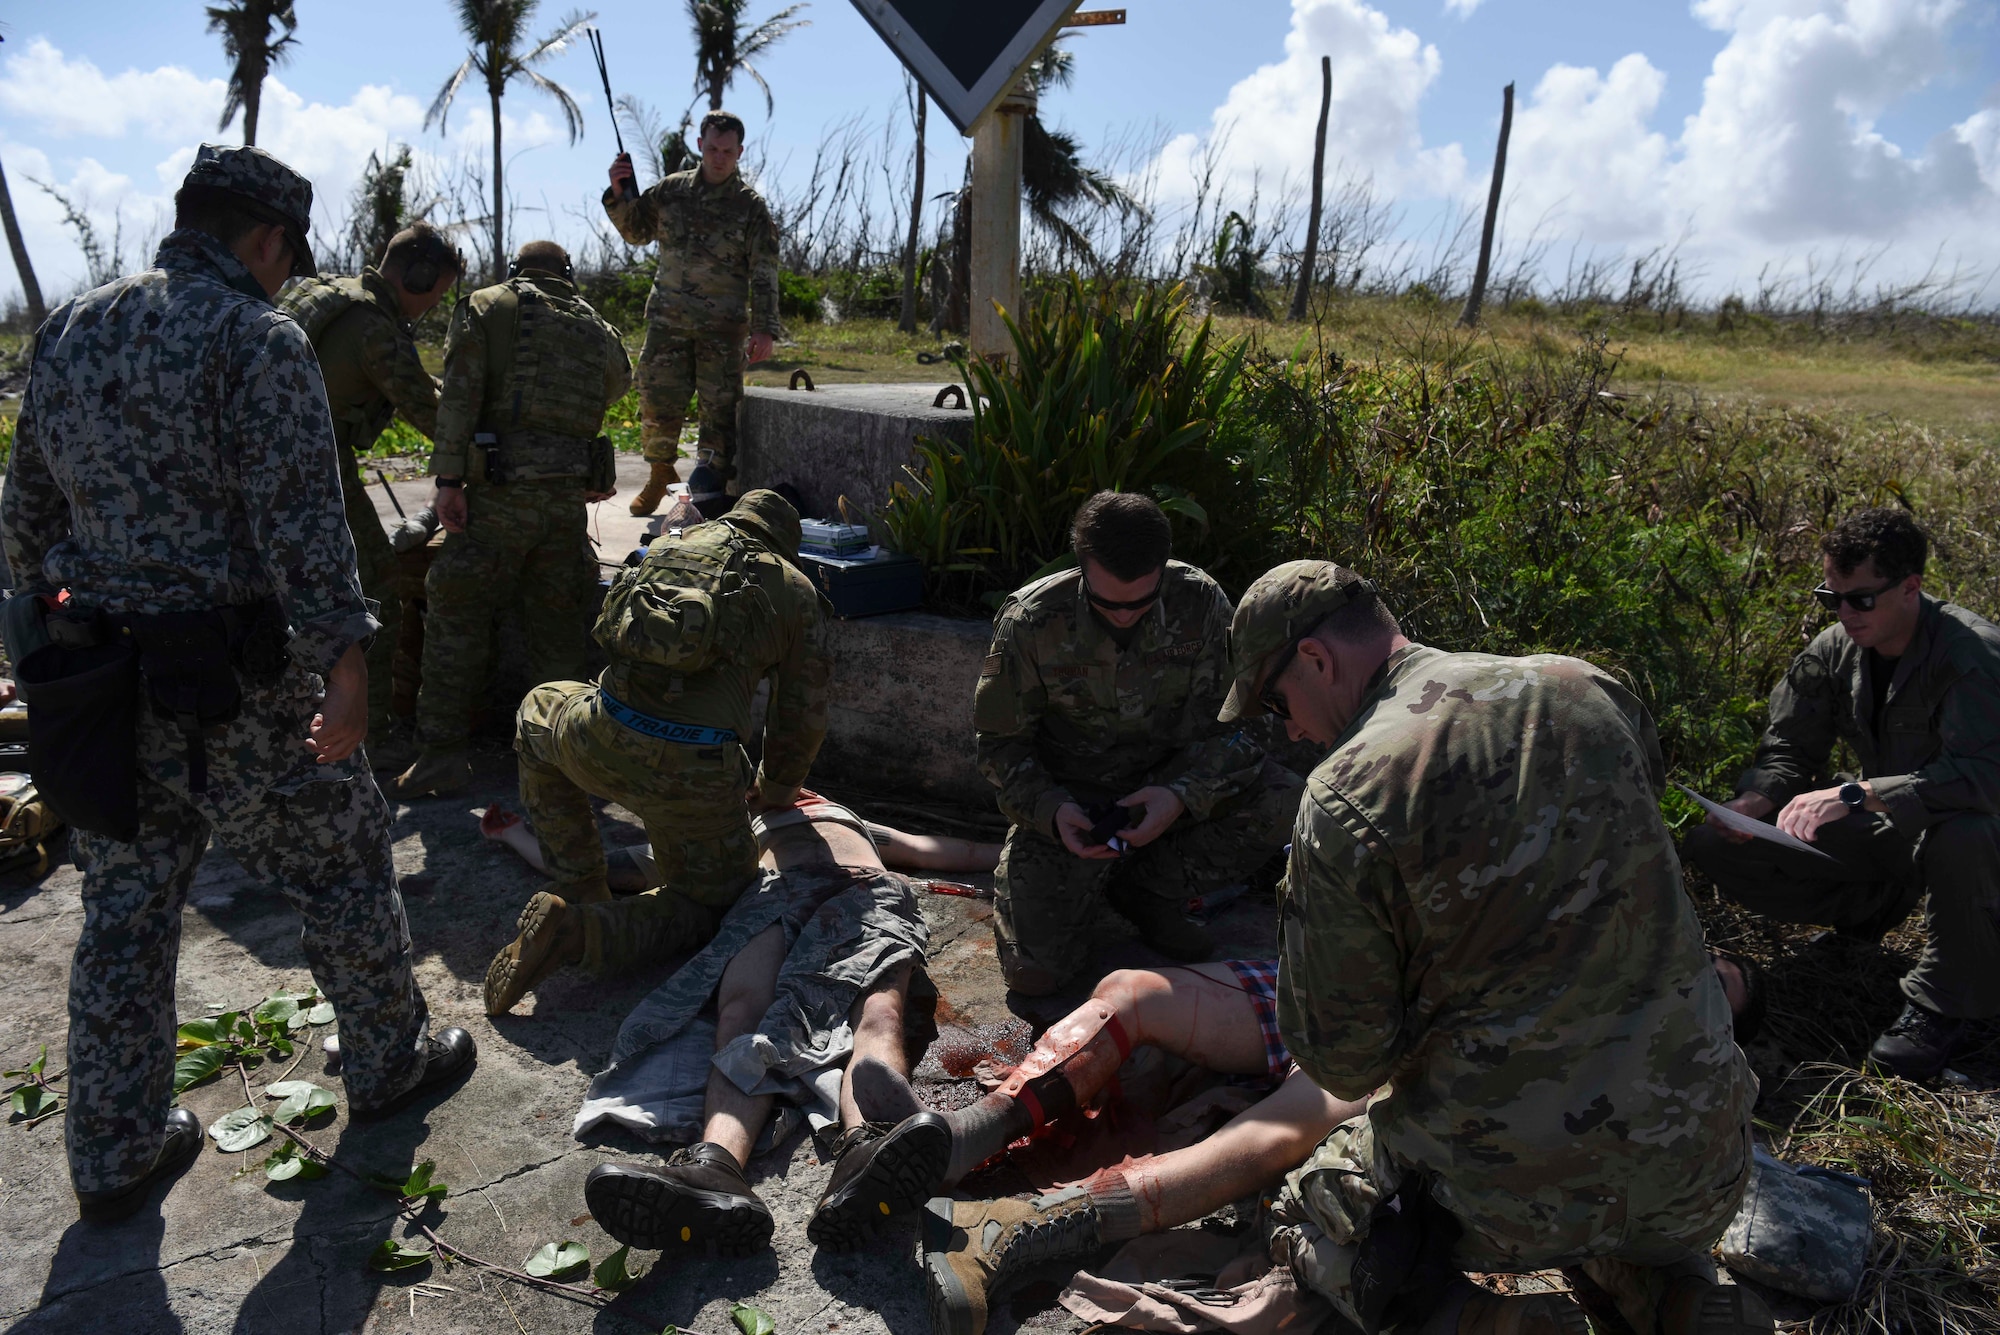 Service members from the United States, Royal Australian Air Force, and Japan Air Self-Defense Force work together to treat simulated injuries on personnel during Cope North 2019, Feb. 27, 2019, at Tinian, Commonwealth of the Northern Marianas.  Service members from the U.S., Royal Australian Air Force, and the Japan Air Self-Defense Force exercised their Humanitarian Assistance and Disaster Relief skills together on Tinian by providing emergency medical care and secure transportation for simulated patients. (U.S. Air Force photo by Tech. Sgt. Jake Barreiro)